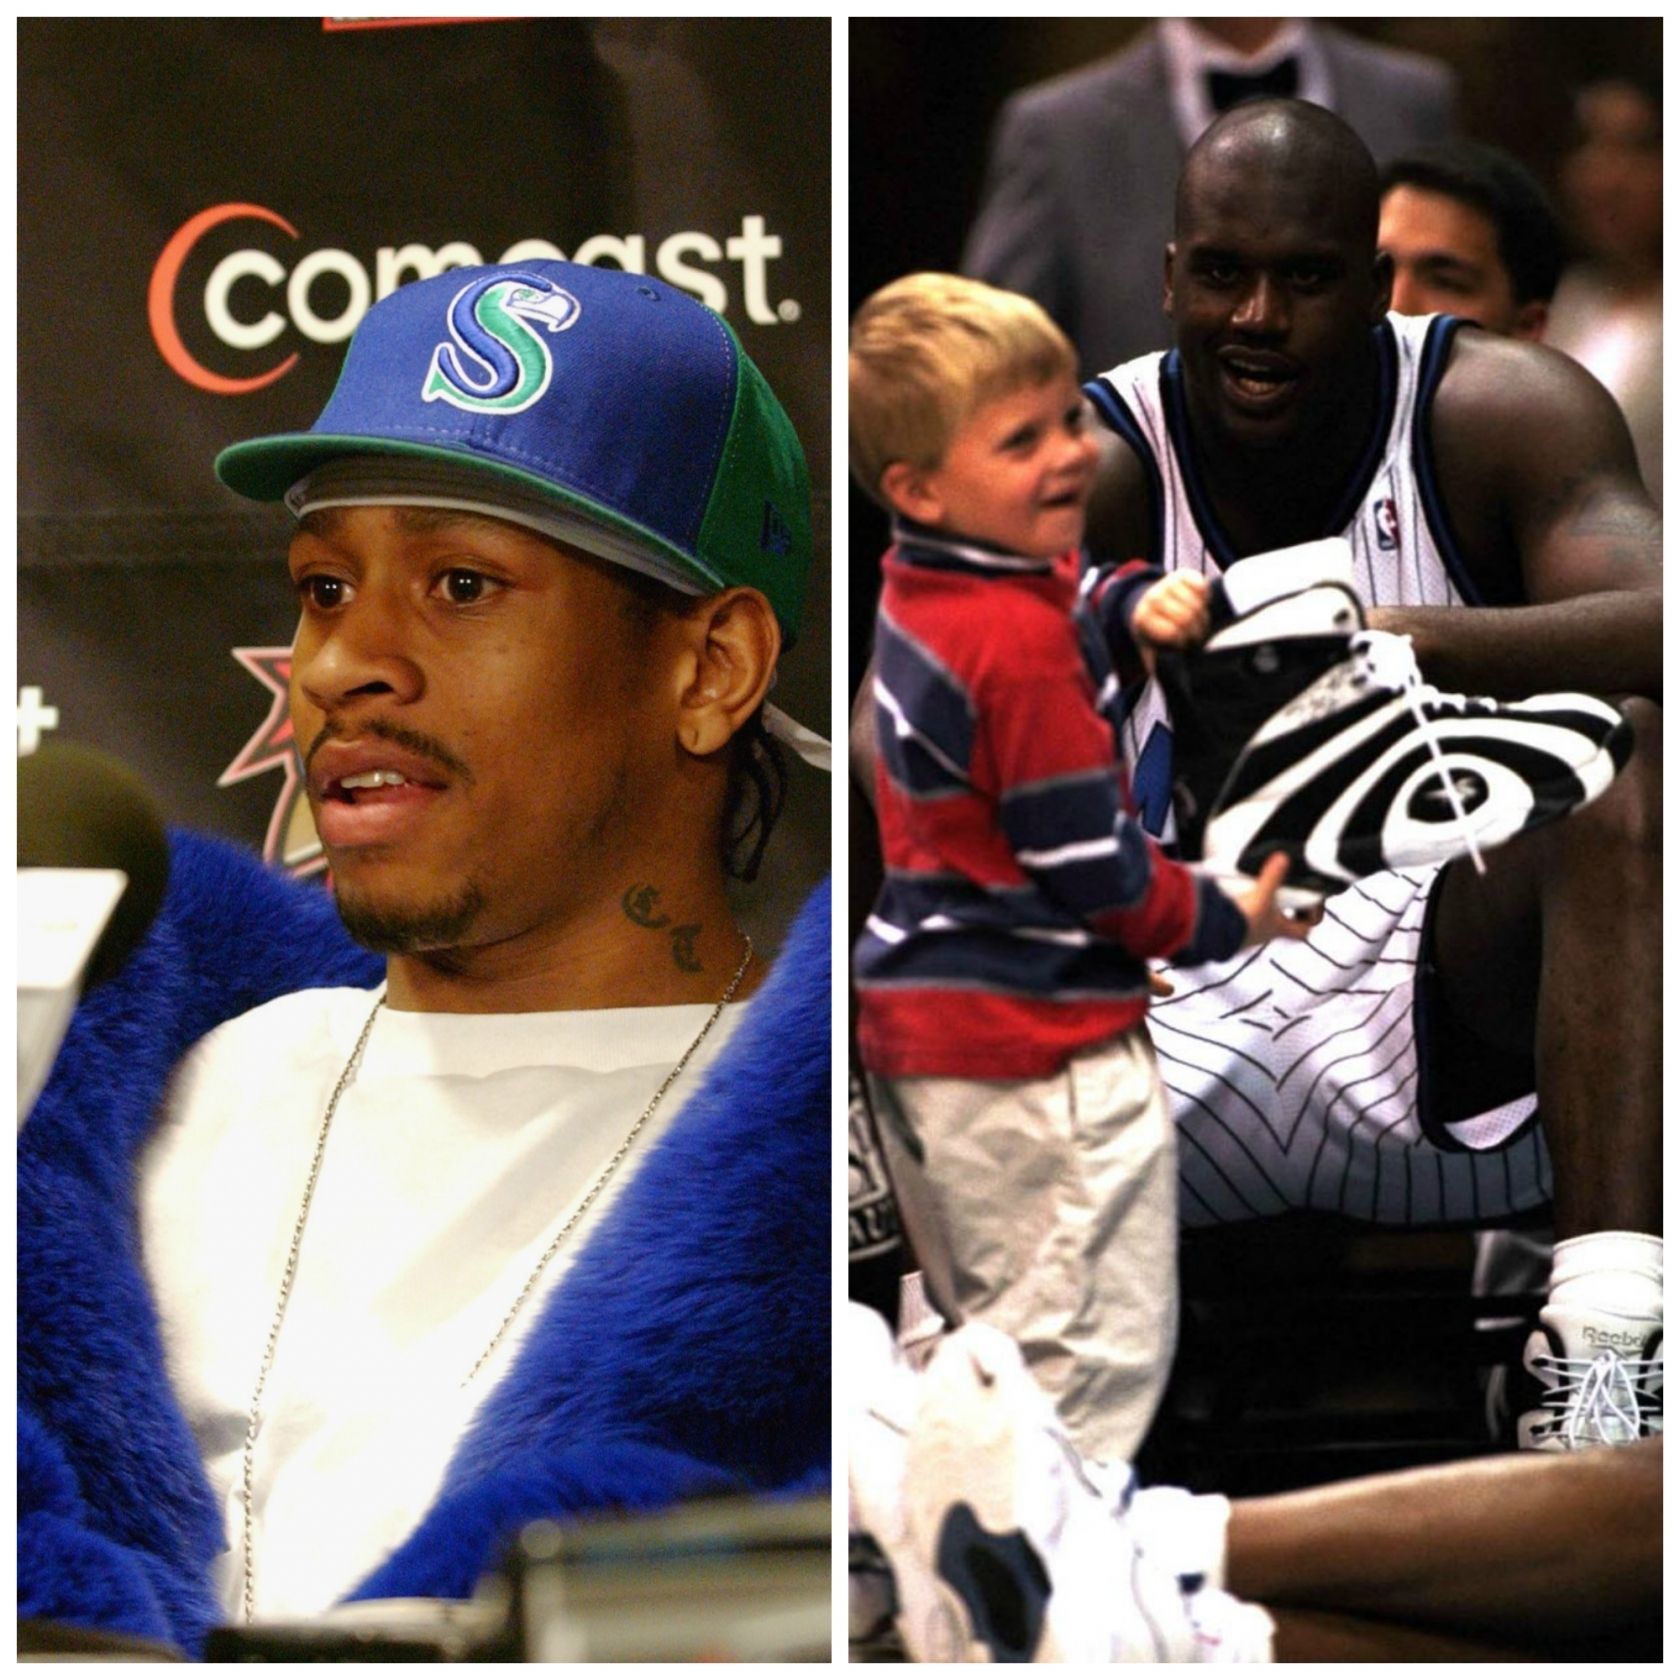 Iverson: They need the dress code now!! - Basketball Network